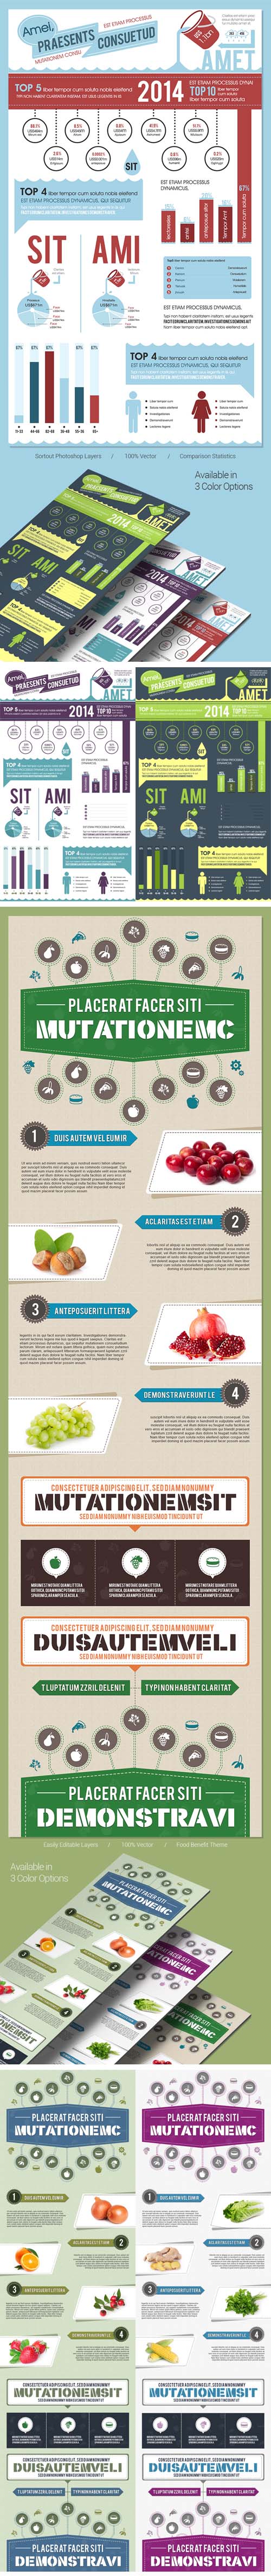 Infographics PSD Templates in Food, Nutrition and Water Research Themes